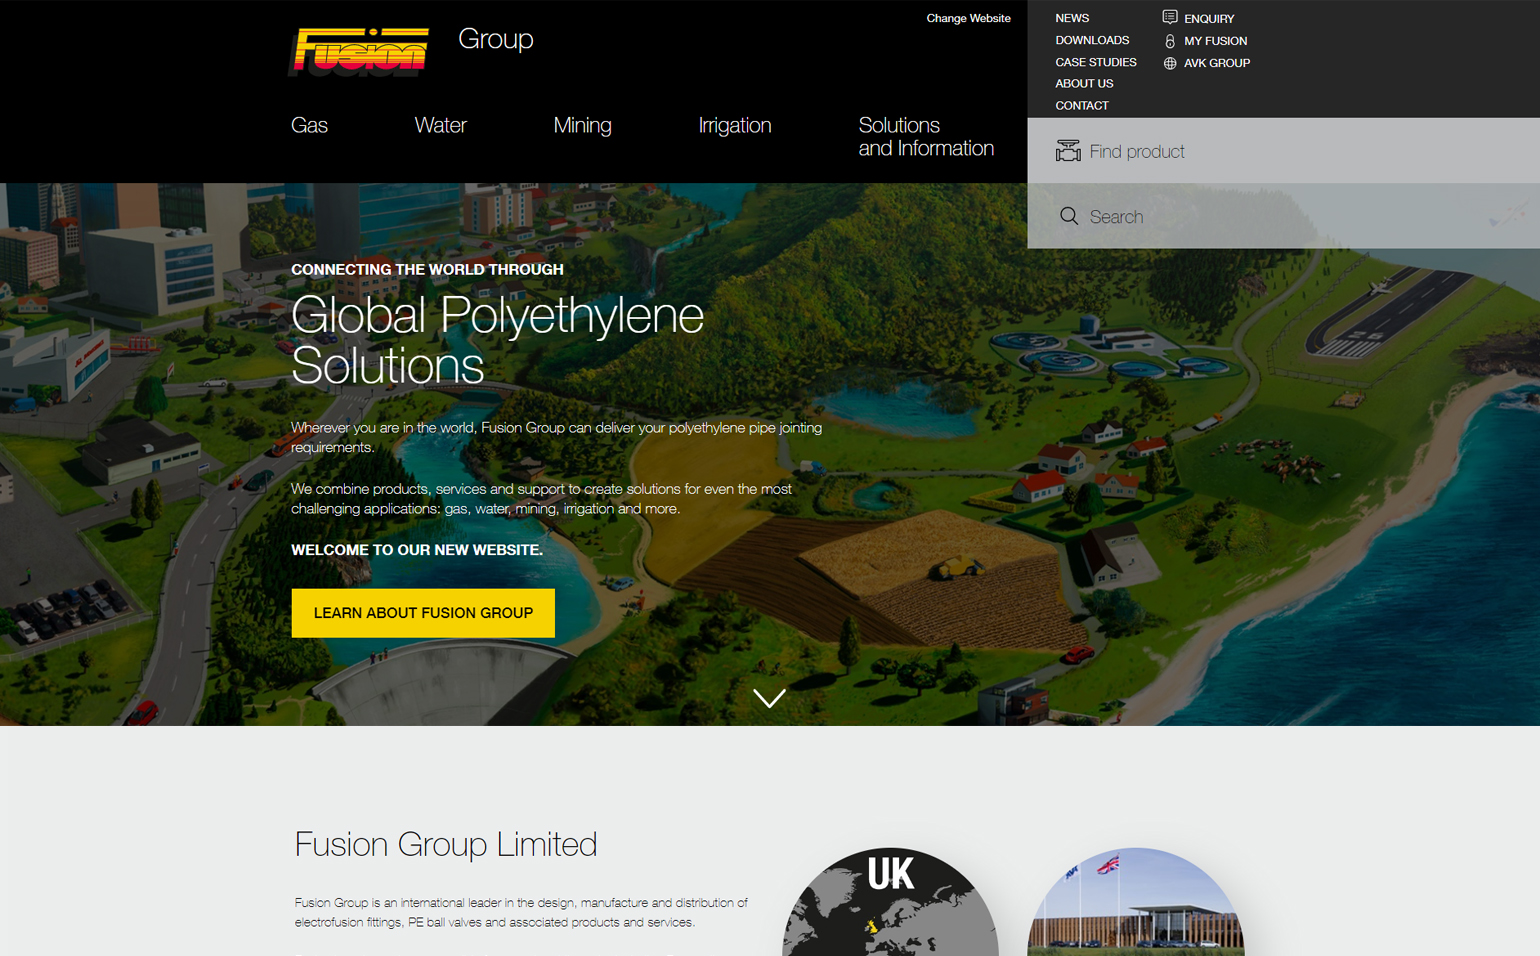 Fusion Group Limited